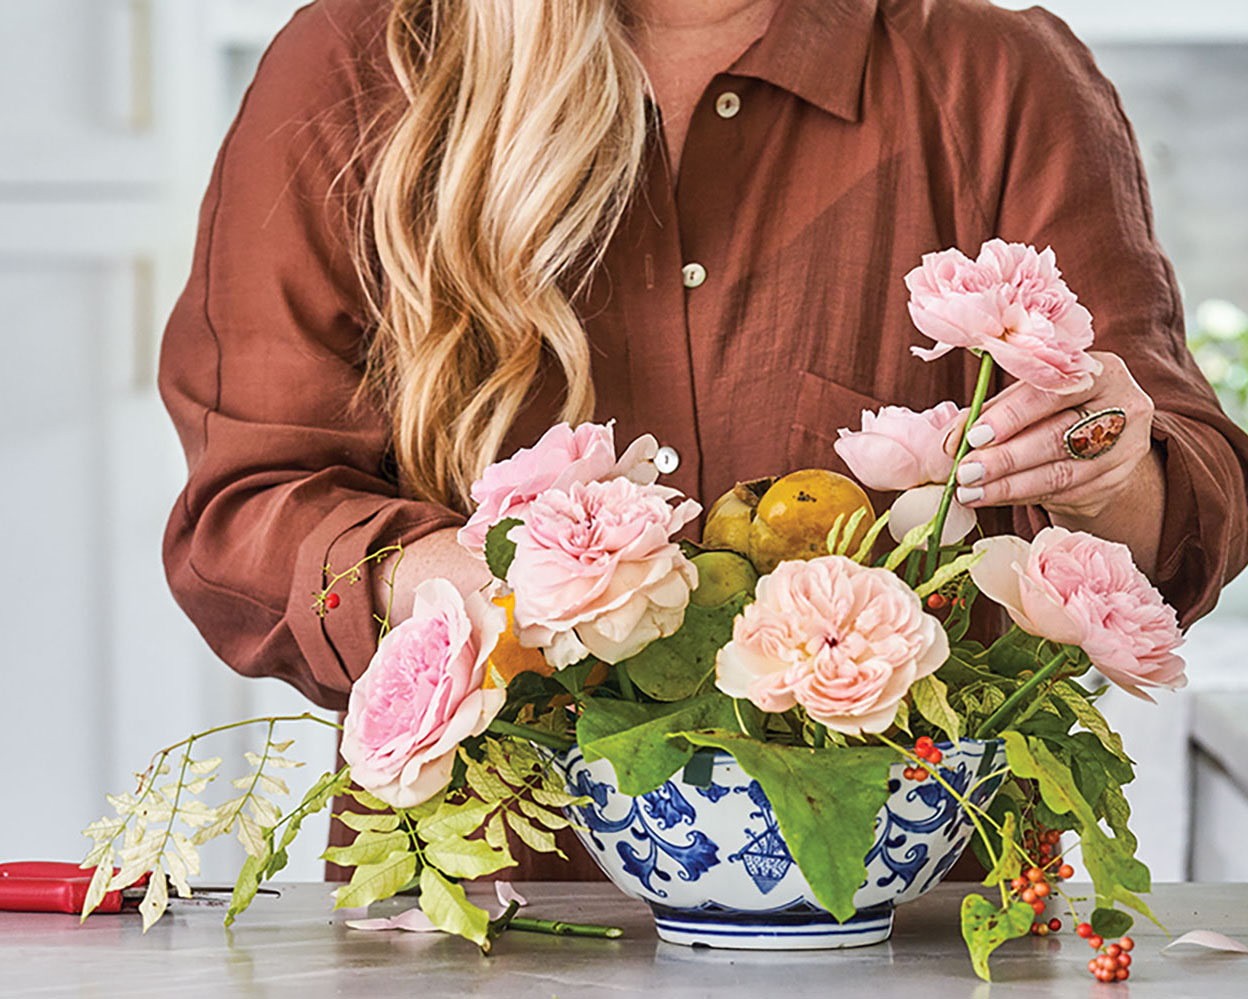 March Cook places stems of garden roses